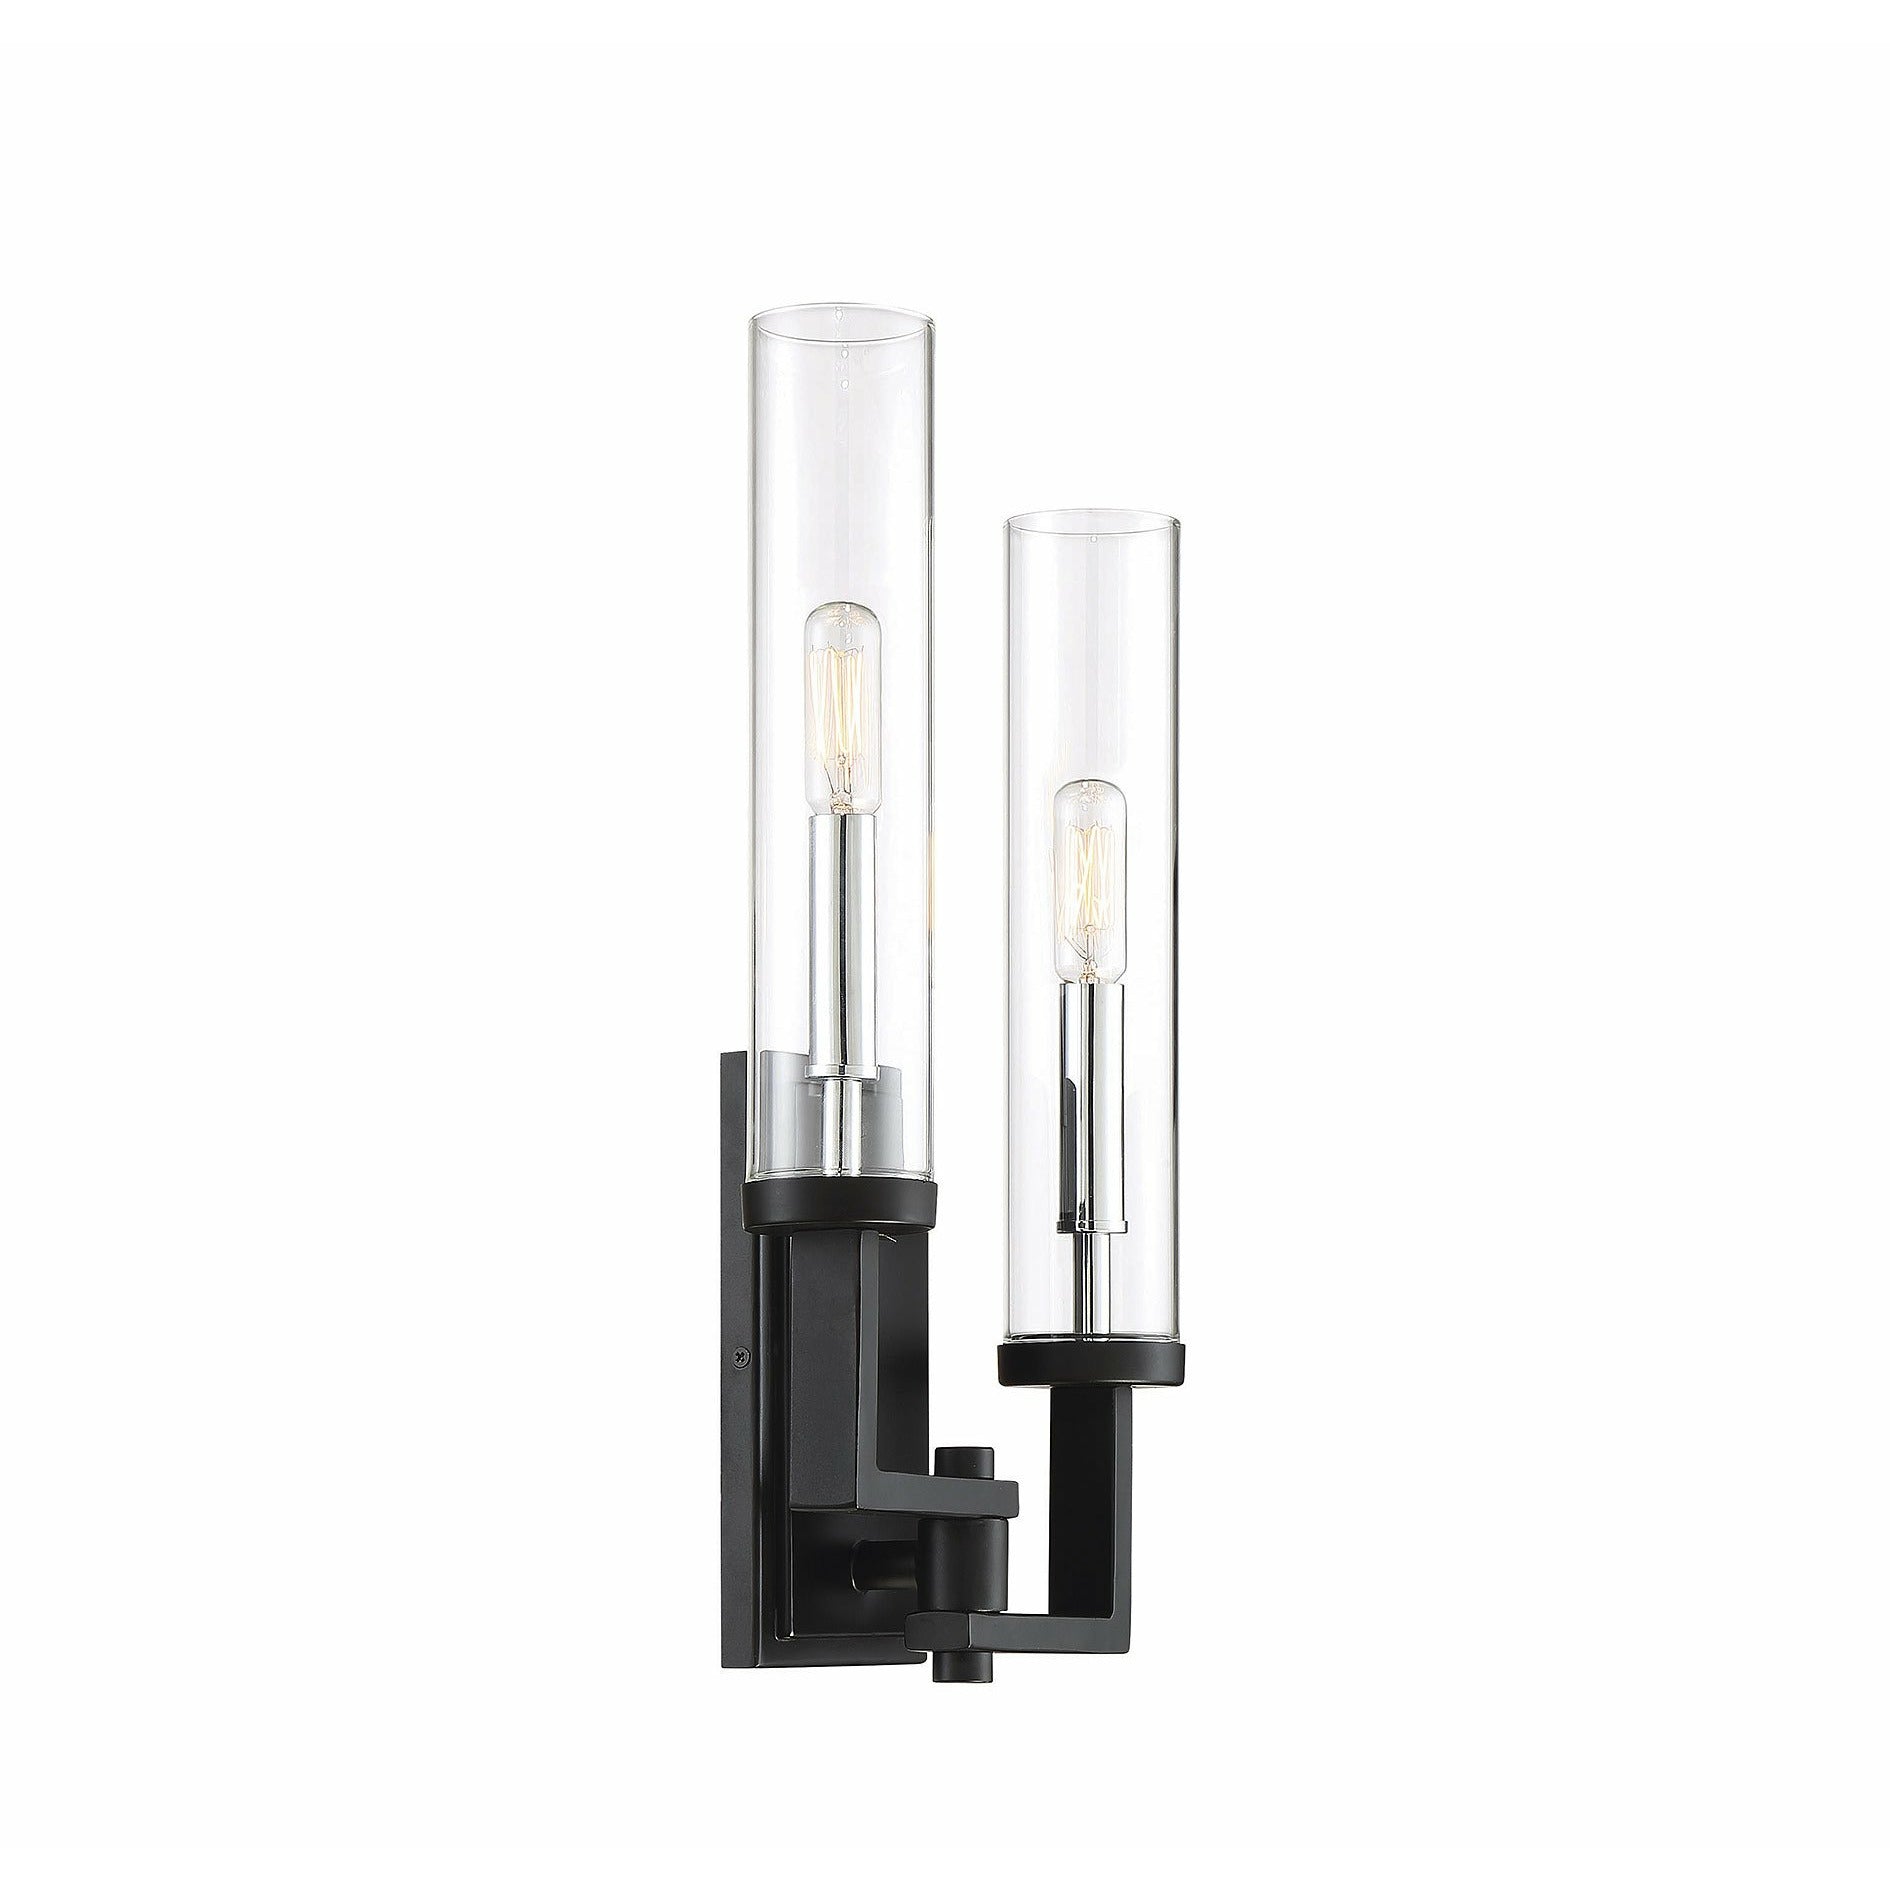 Folsom Sconce Matte Black with Polished Chrome Accents